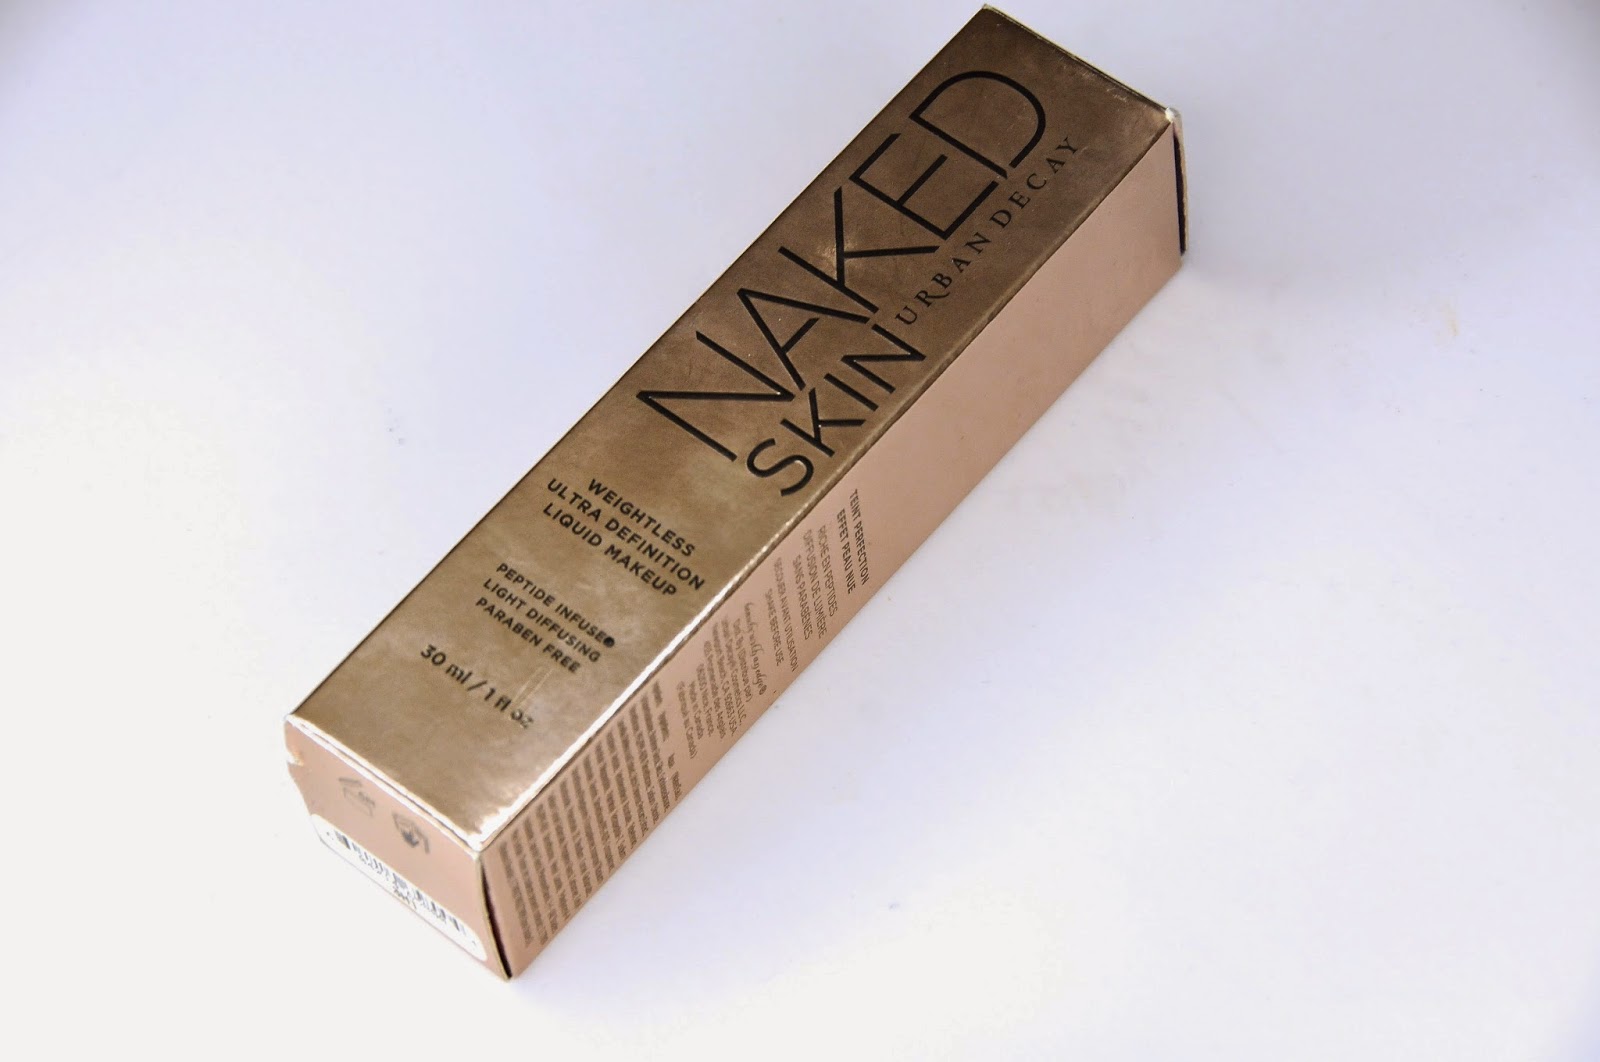 Urban Decay Naked Skin Weightless Ultra Definition Liquid Makeup review - Ingrid  Hughes Beauty